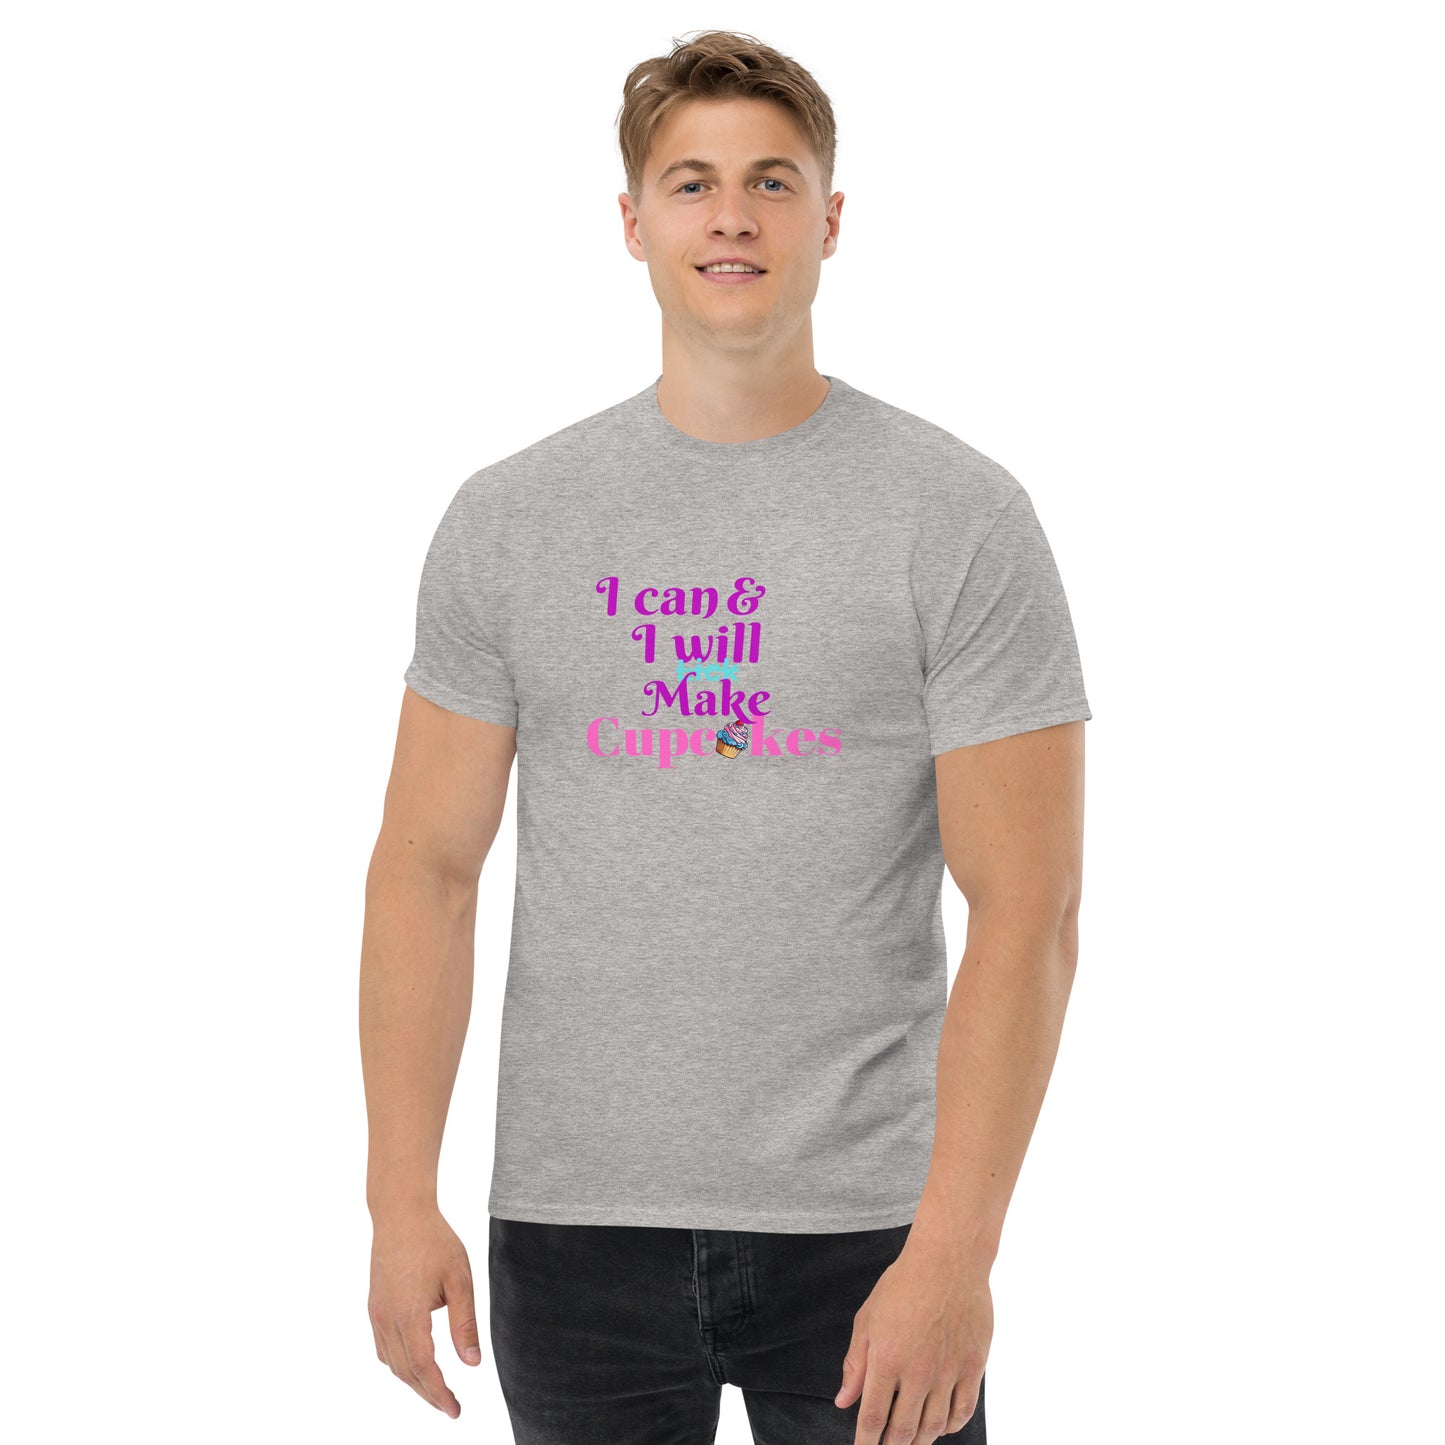 I can and I will Lick/Make Cupcakes Bakery Themed Men's classic tee CedarHill Country Market